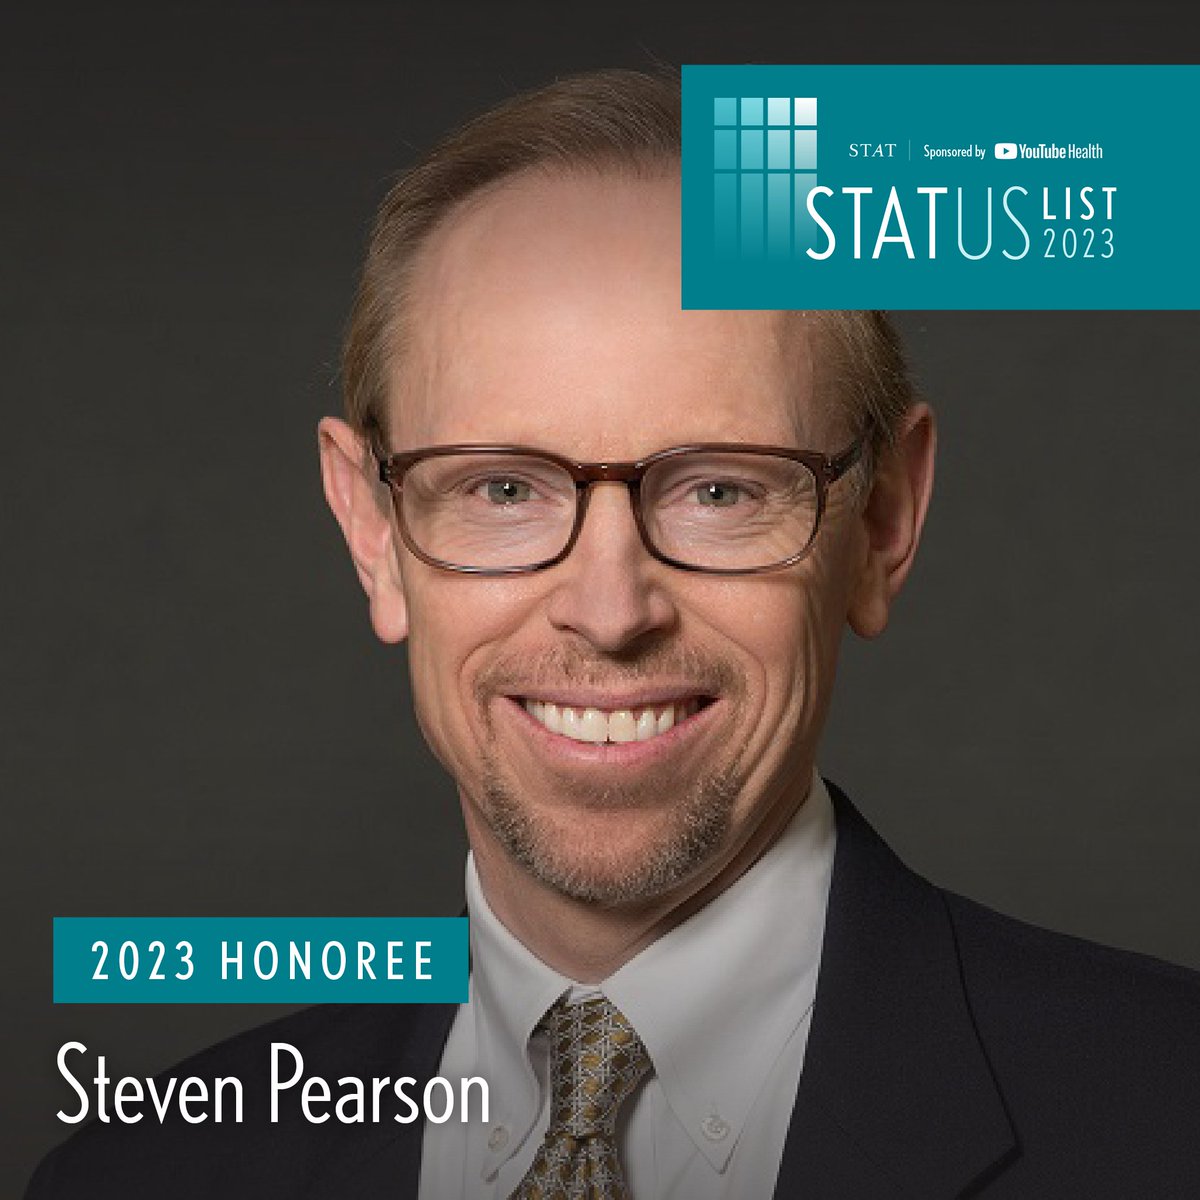 We are honored that ICER President Steve Pearson has been named an honoree on this year’s @statnews #STATUSList, the ultimate list of leaders in health, medicine, and science. 

statnews.com/status-list/20…